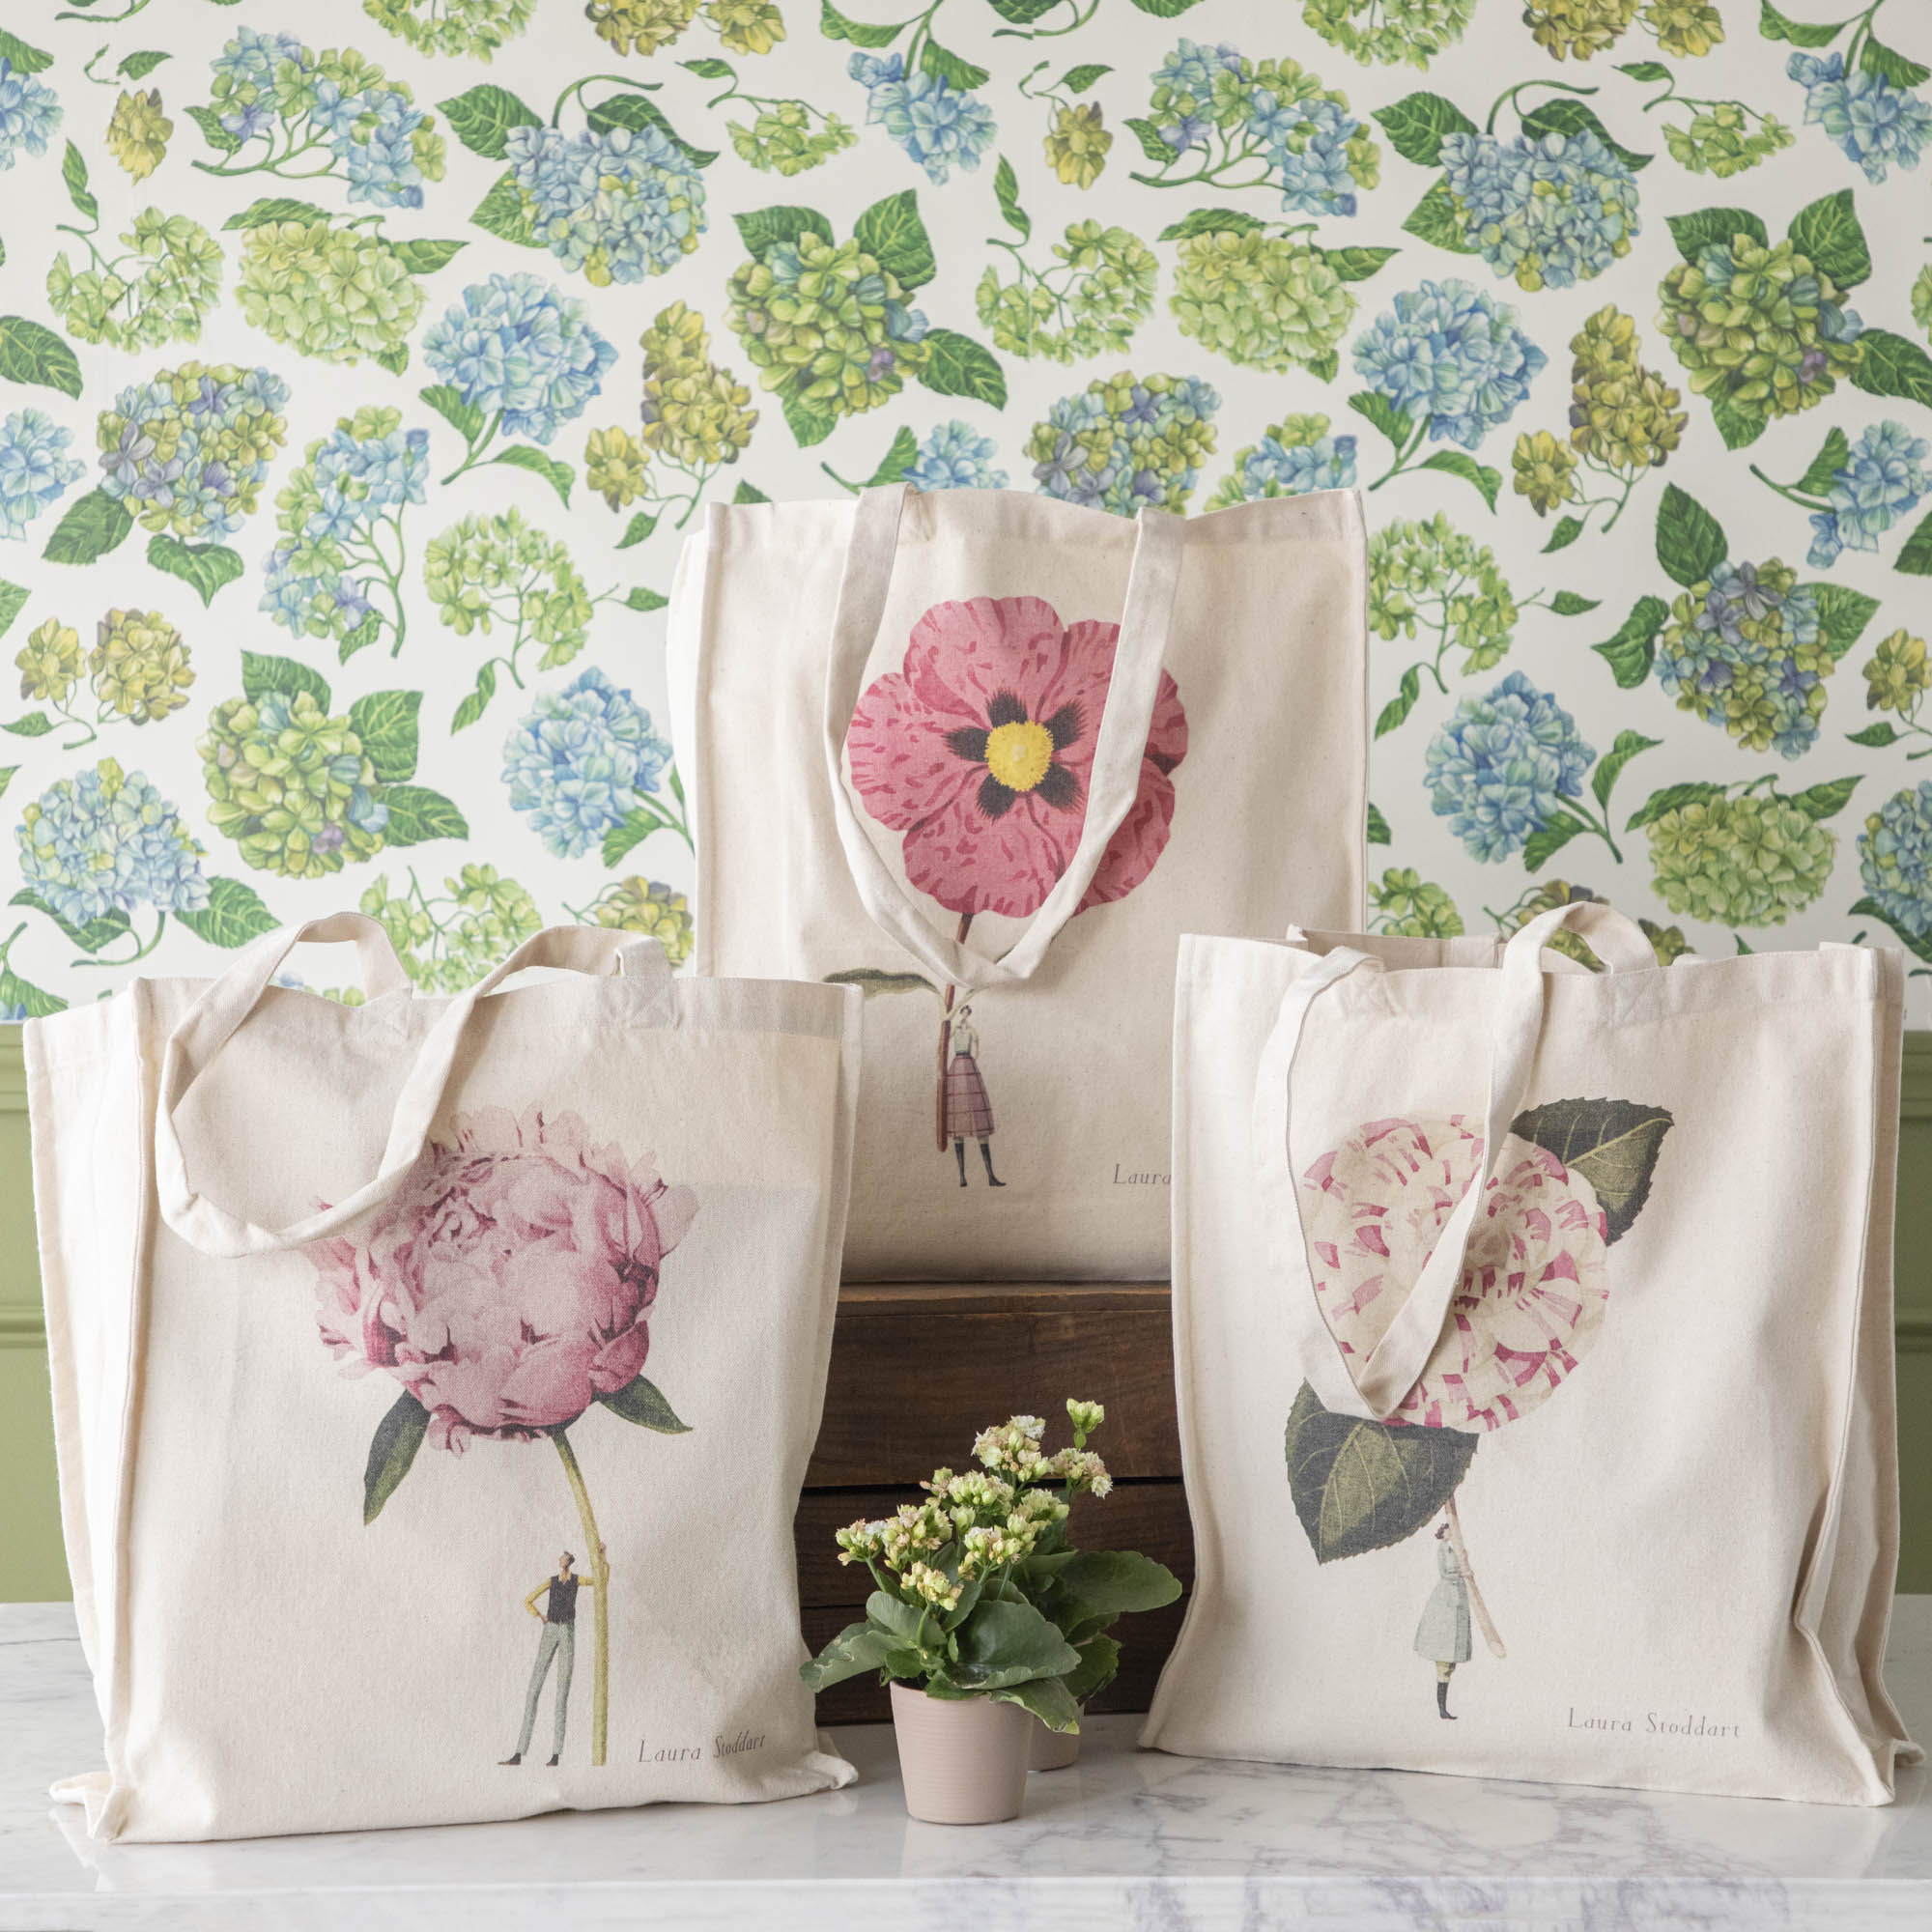 Three of the Heavyweight Canvas Tote Bags featuring pink floral artwork by Laura Stoddart arranged alongside potted plants against a hydrangea wallpaper background.